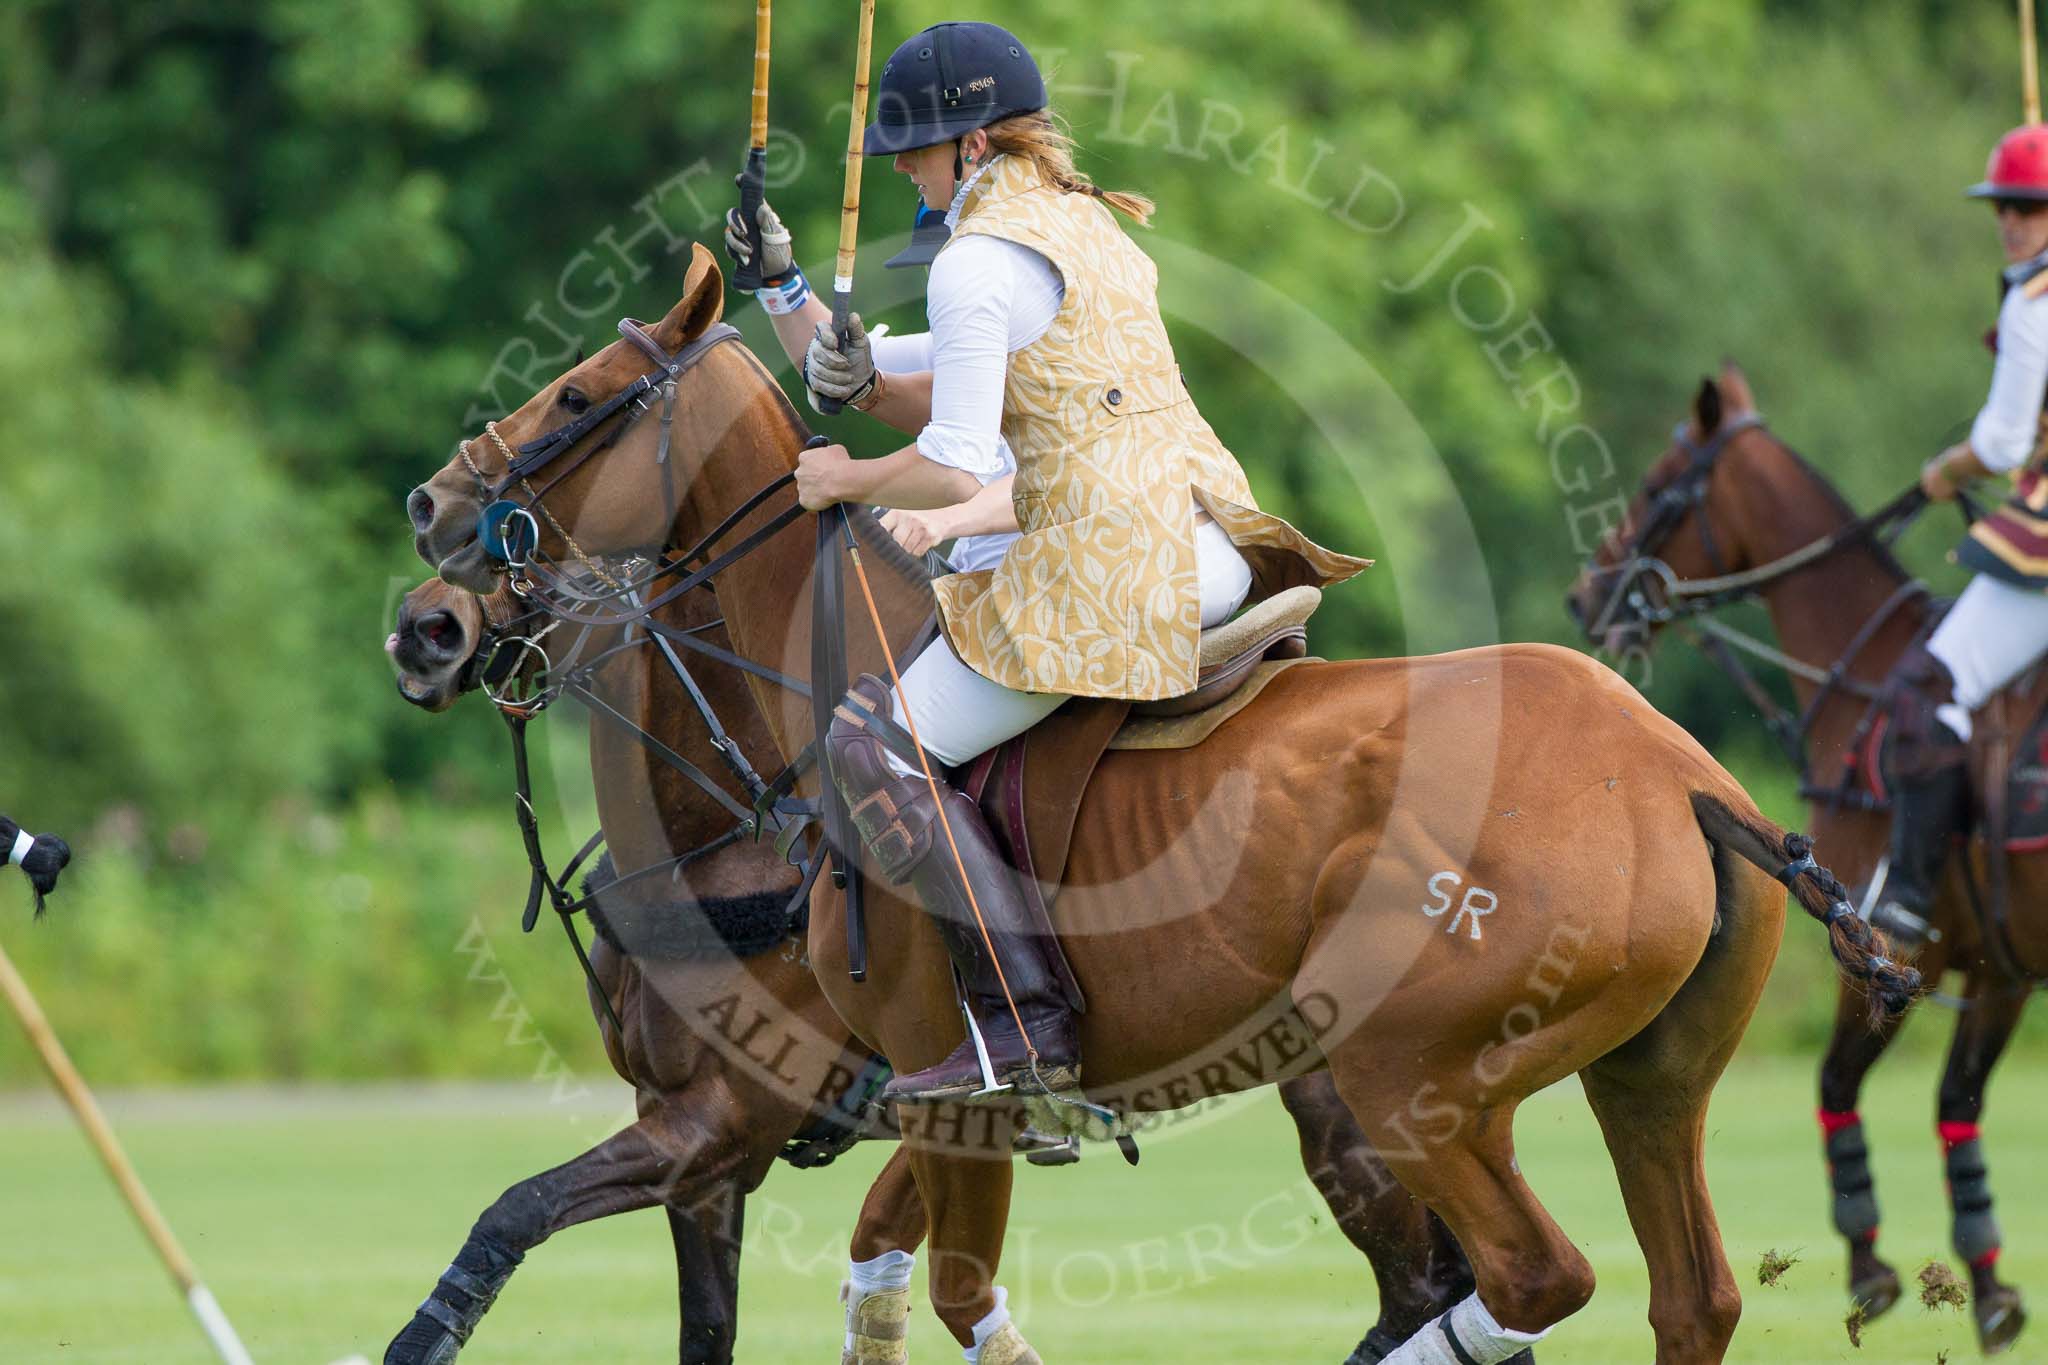 7th Heritage Polo Cup finals: The Amazons of Polo, sponsored by Polistas:
Sheena Robertson..
Hurtwood Park Polo Club,
Ewhurst Green,
Surrey,
United Kingdom,
on 05 August 2012 at 15:12, image #128